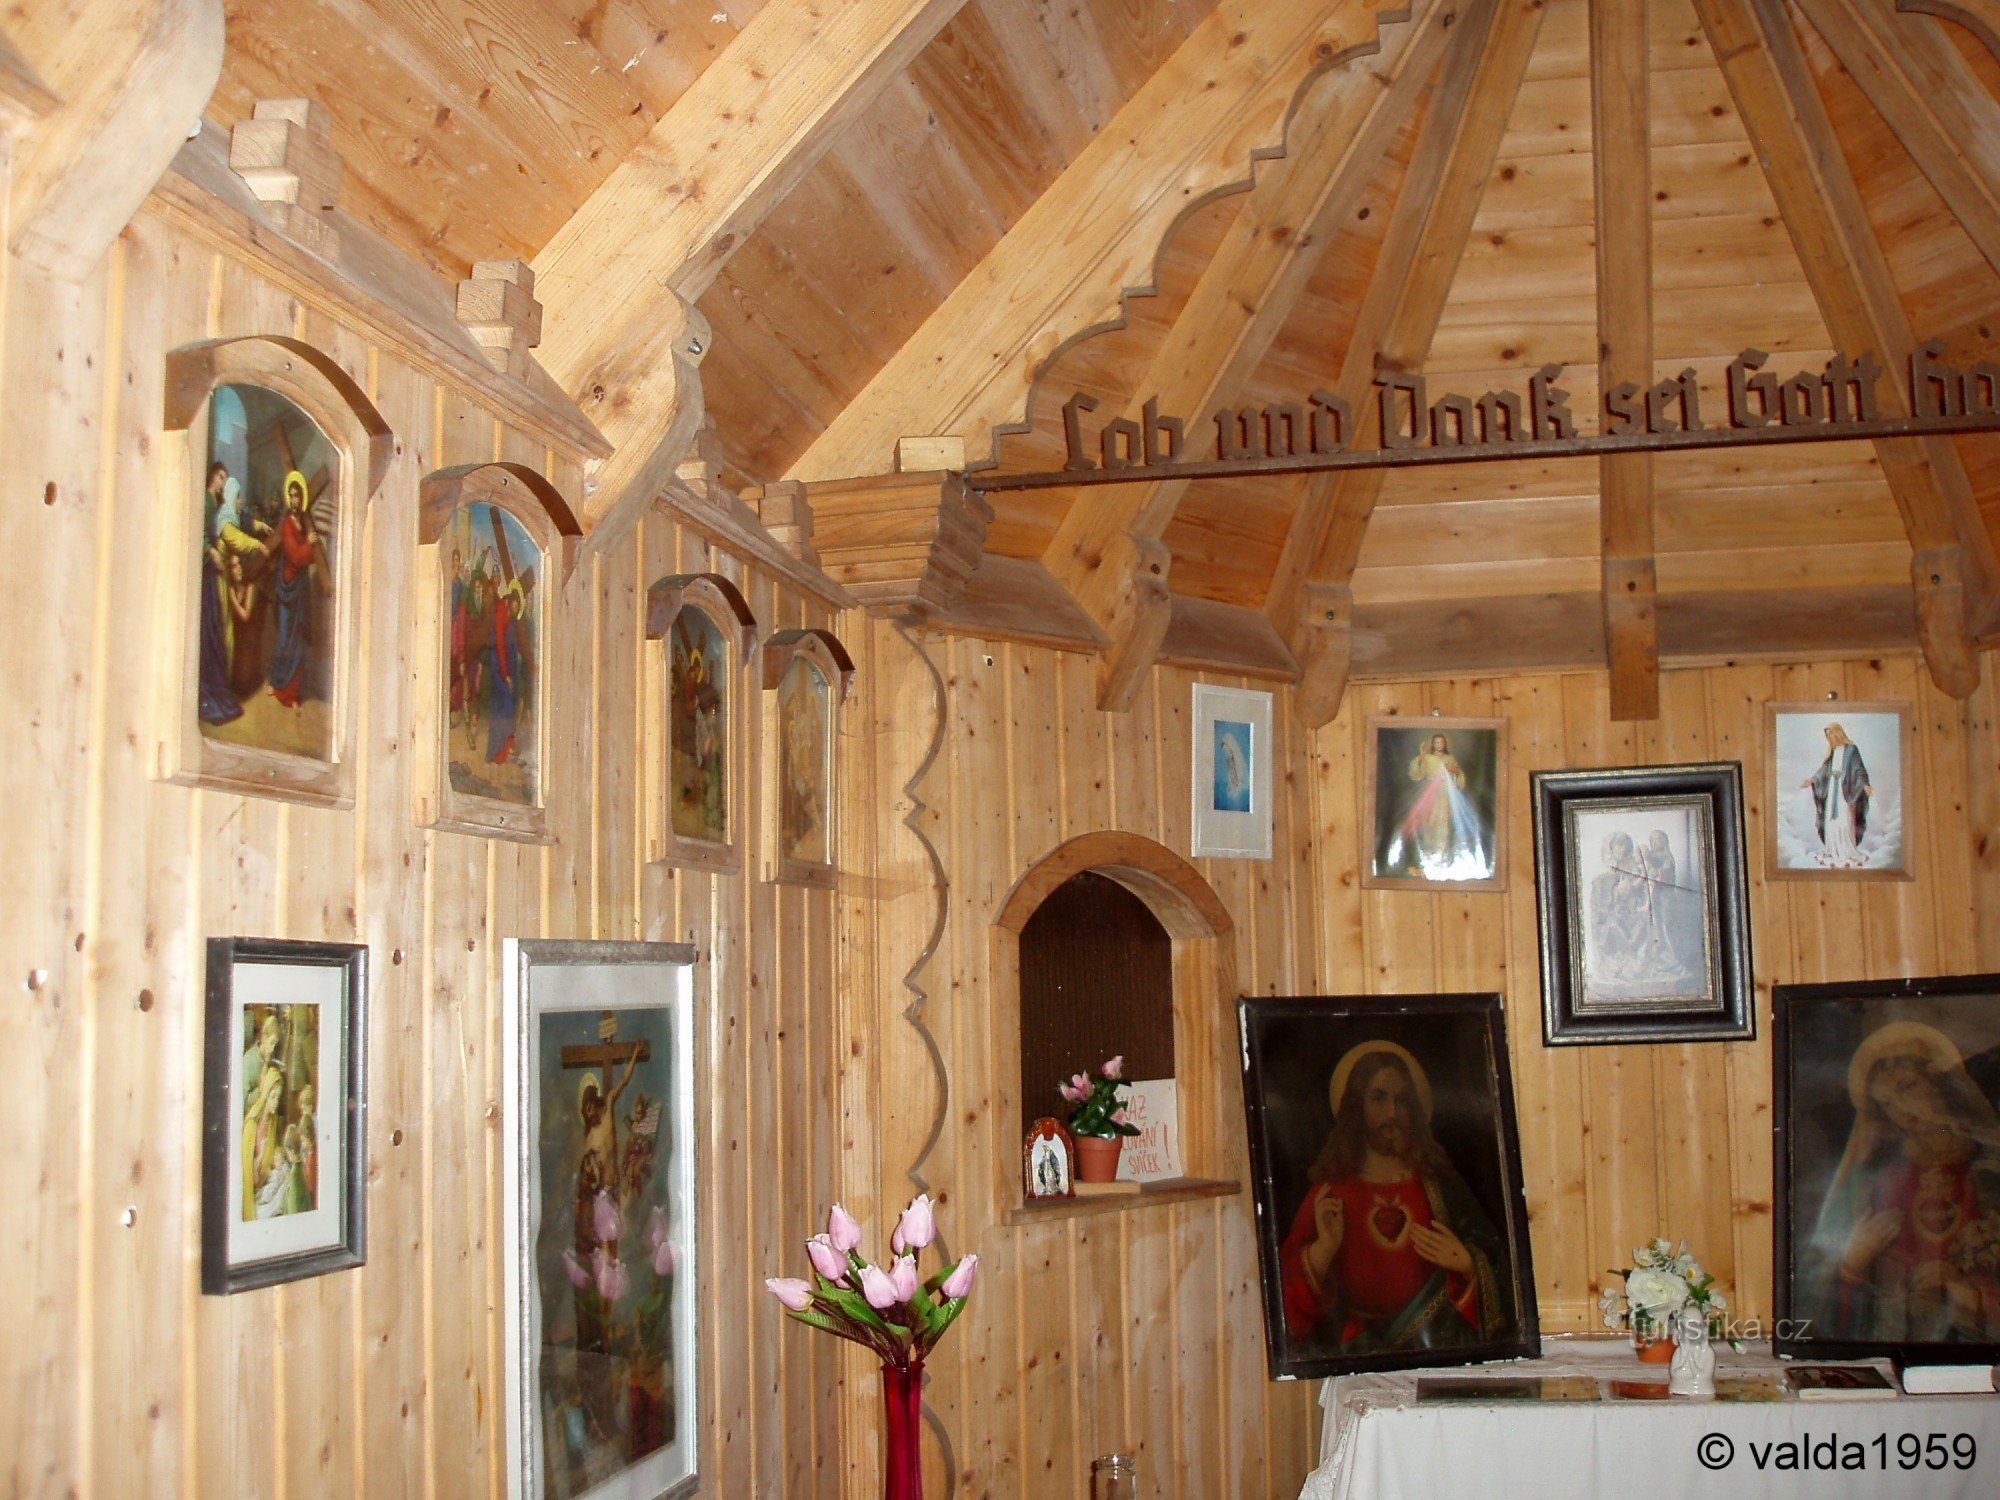 the interior of the chapel is in the original German version